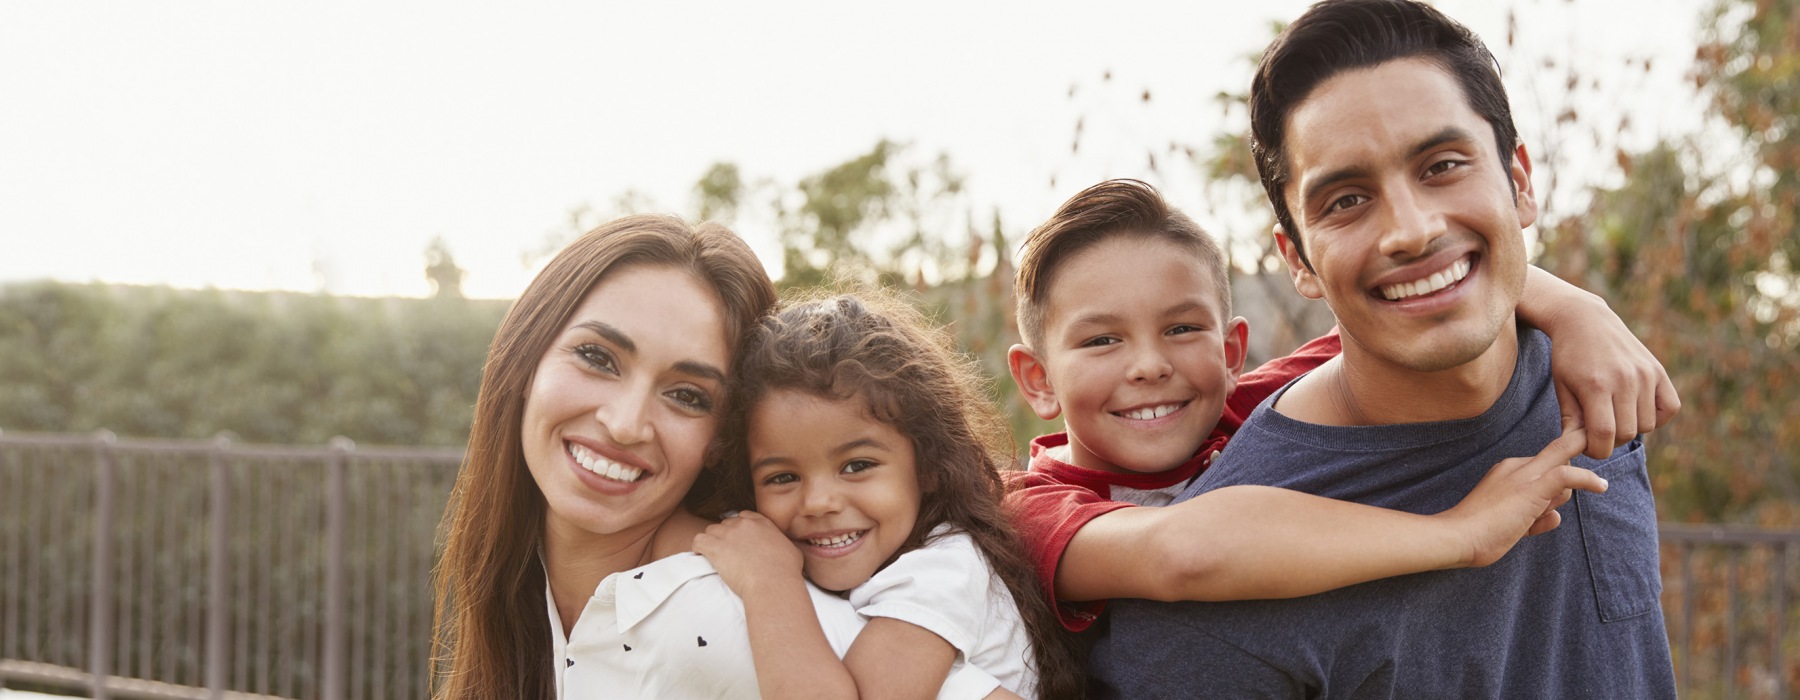 Young Hispanic parents piggyback their children in the park, smiling 